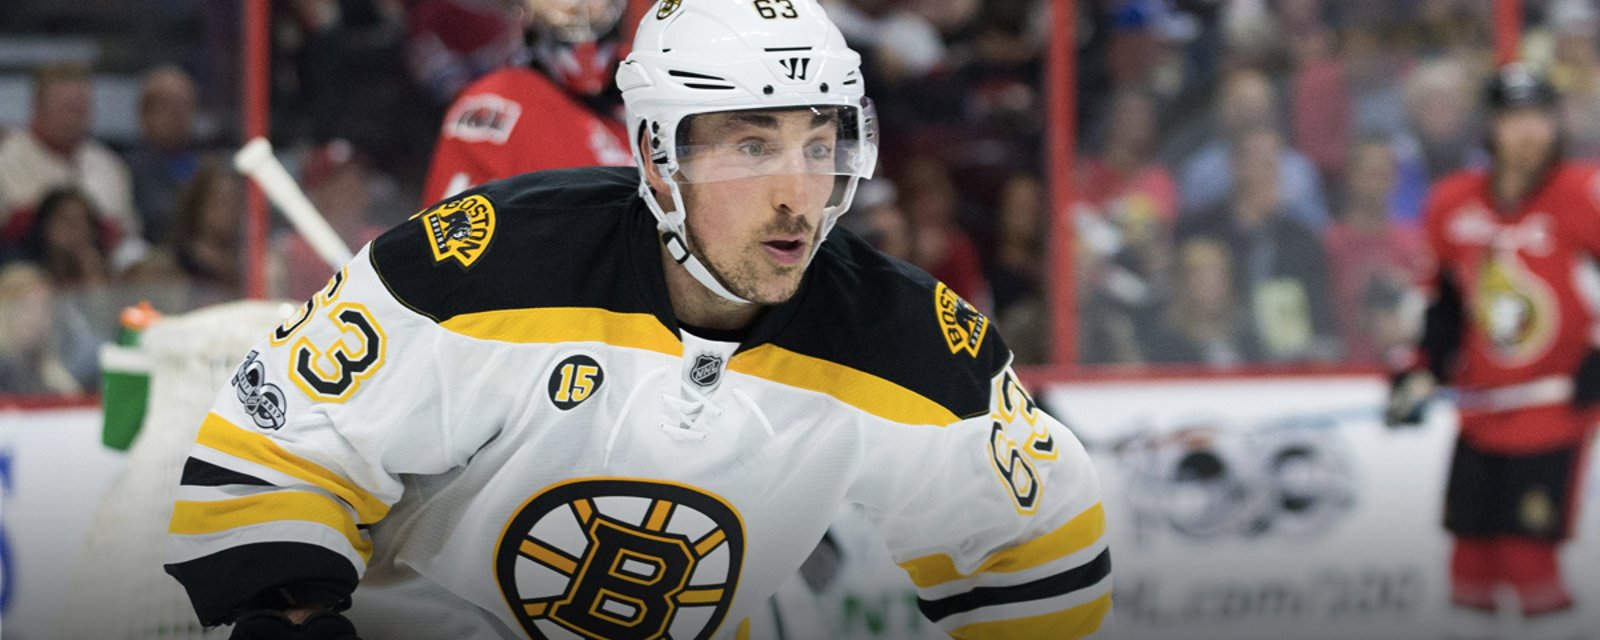 Report: Cassidy updates health statuses of Krug and Marchand